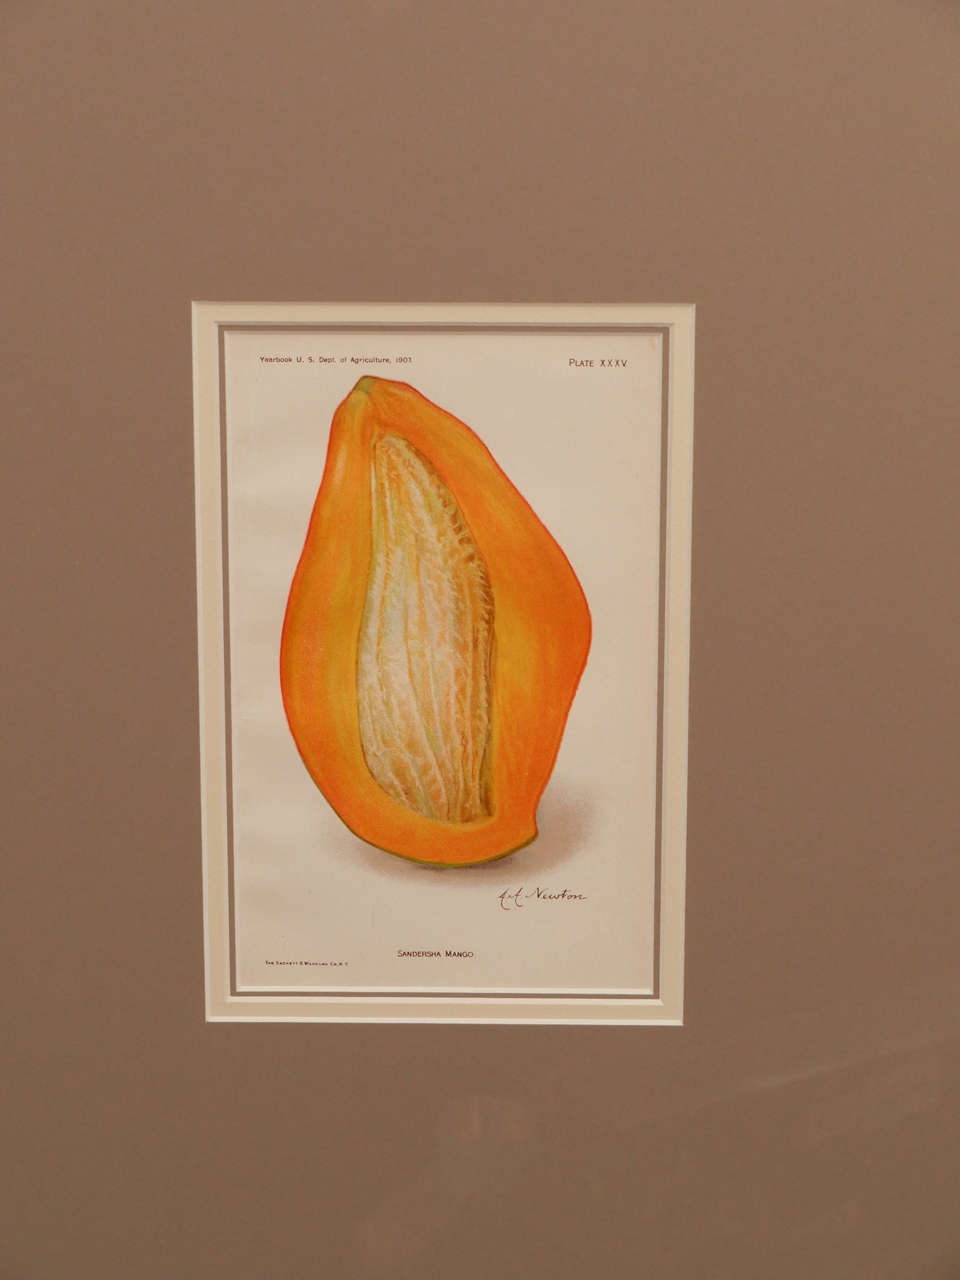 American Architectural Digest Fruit Print